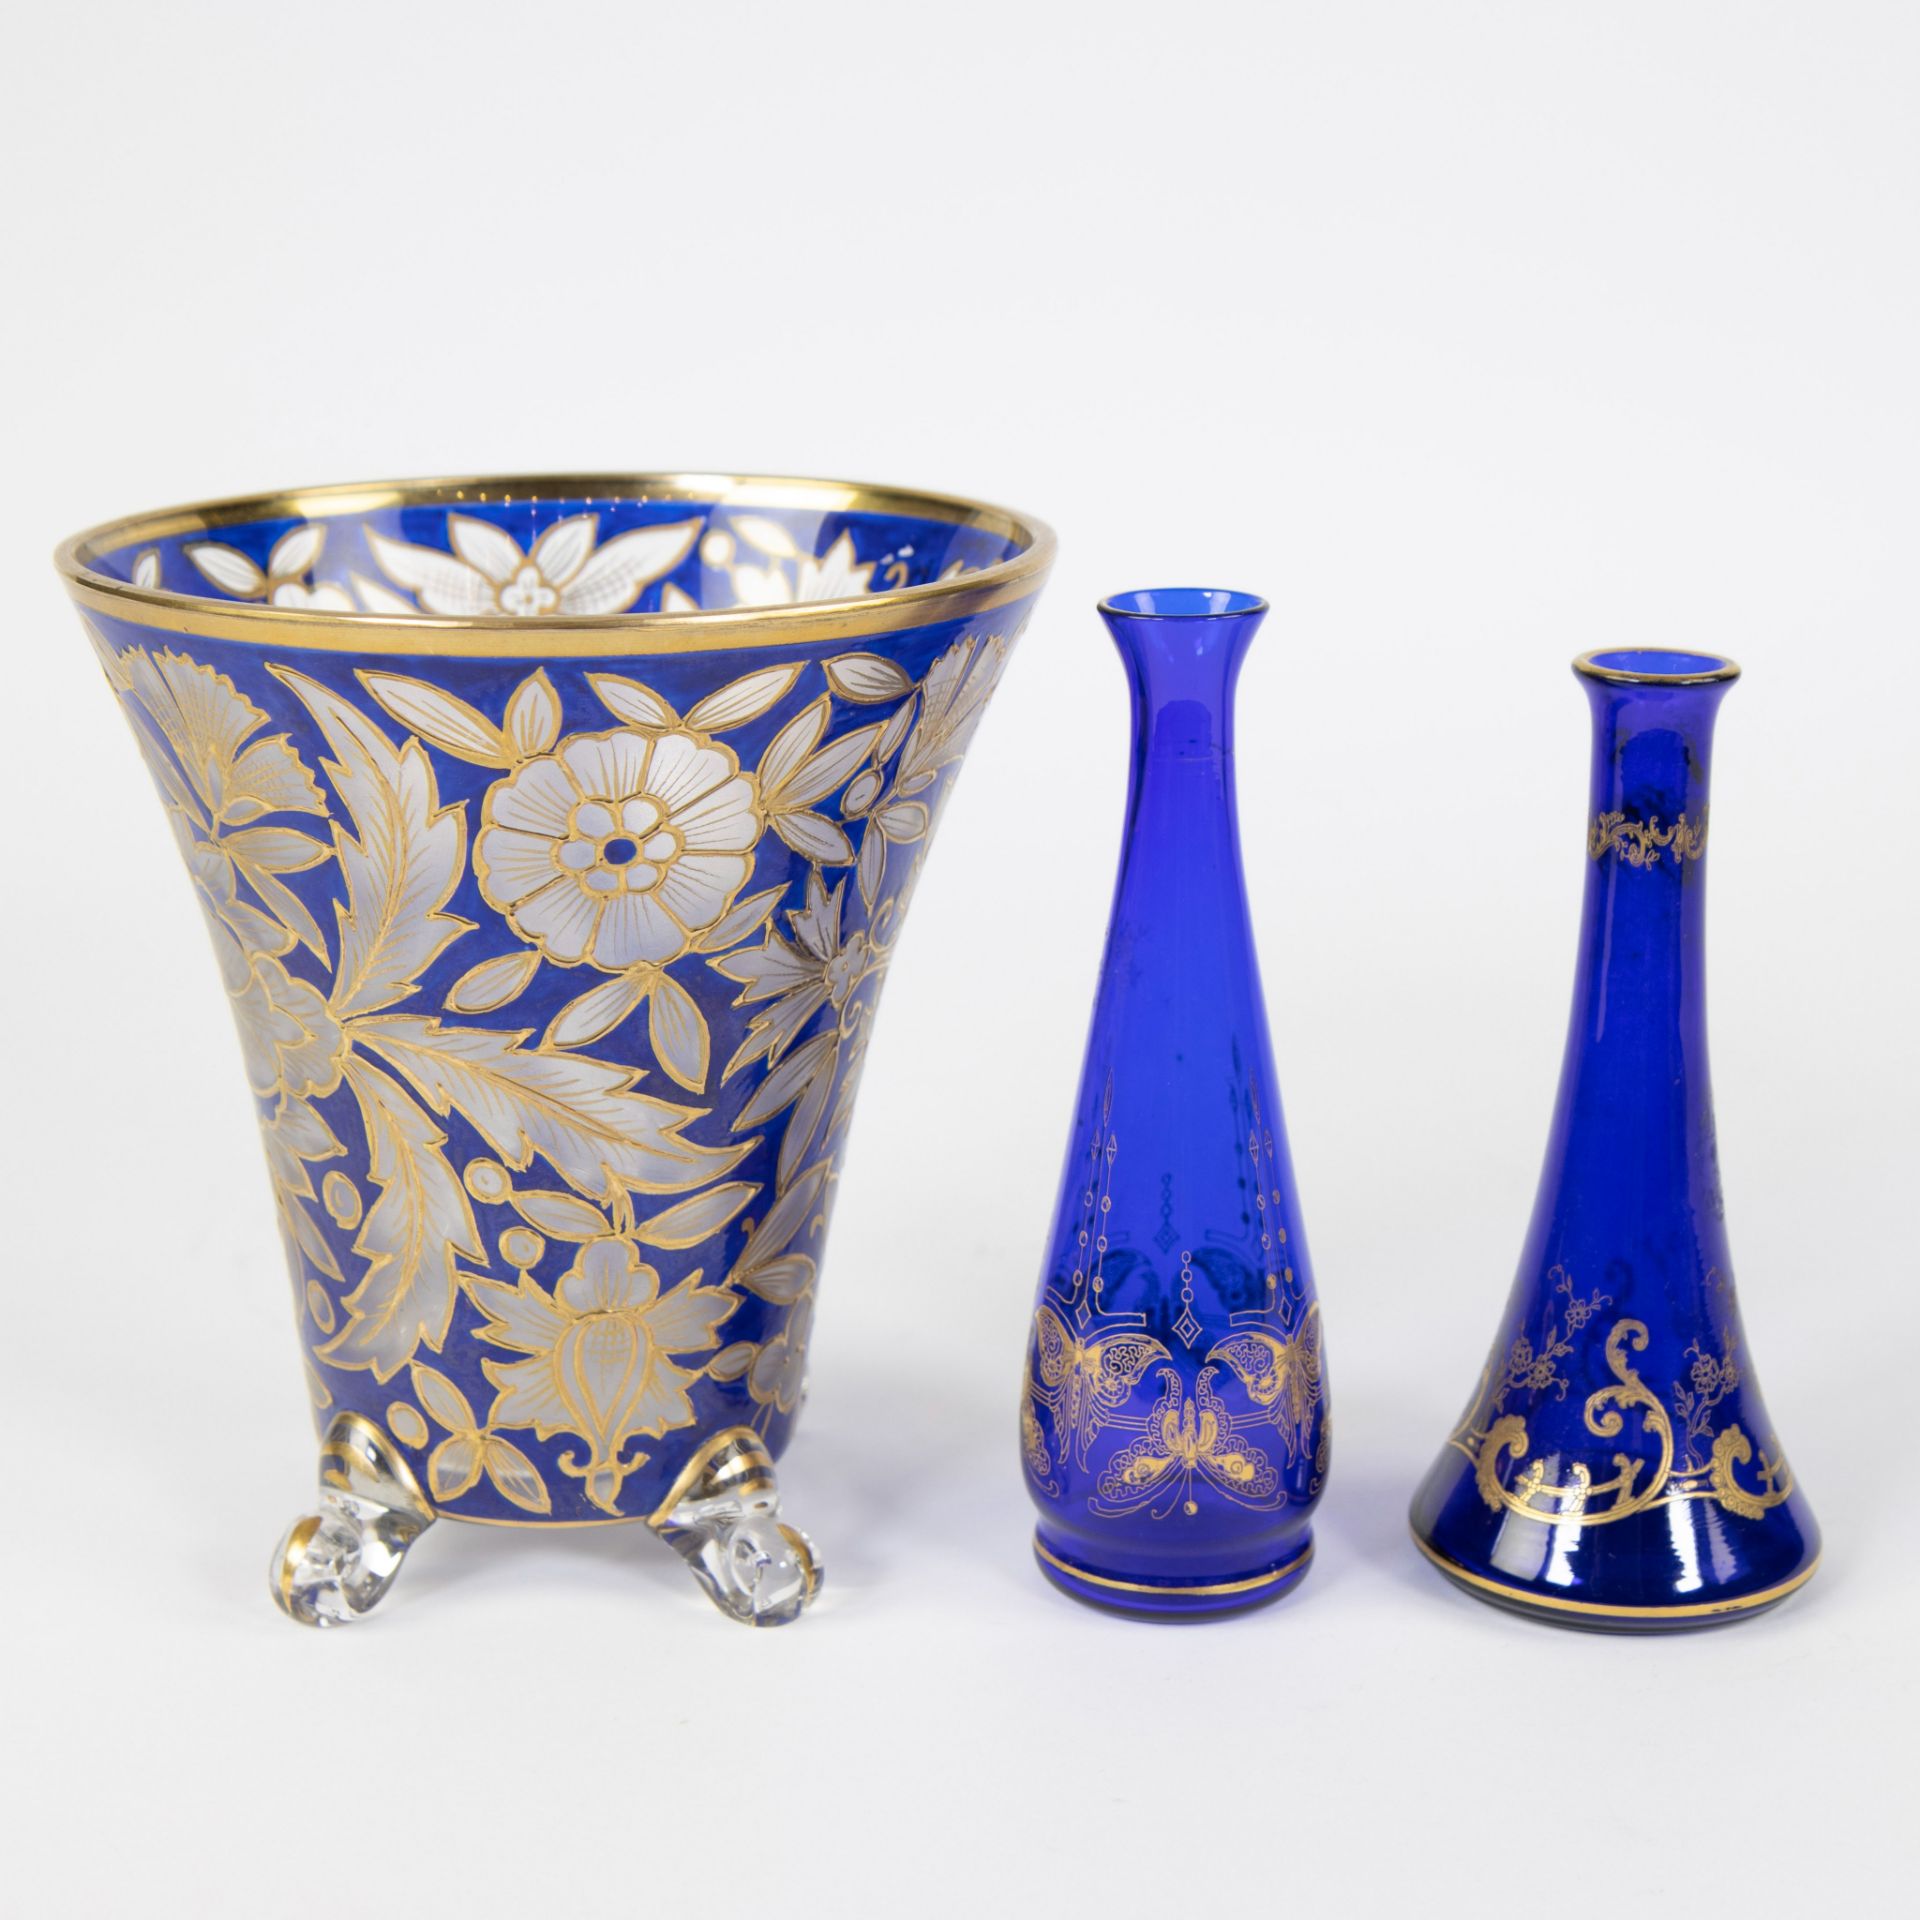 Val Saint Lambert Art Nouveau vase (2) blue with finely decorated decor and 19th century coupe with - Image 2 of 5